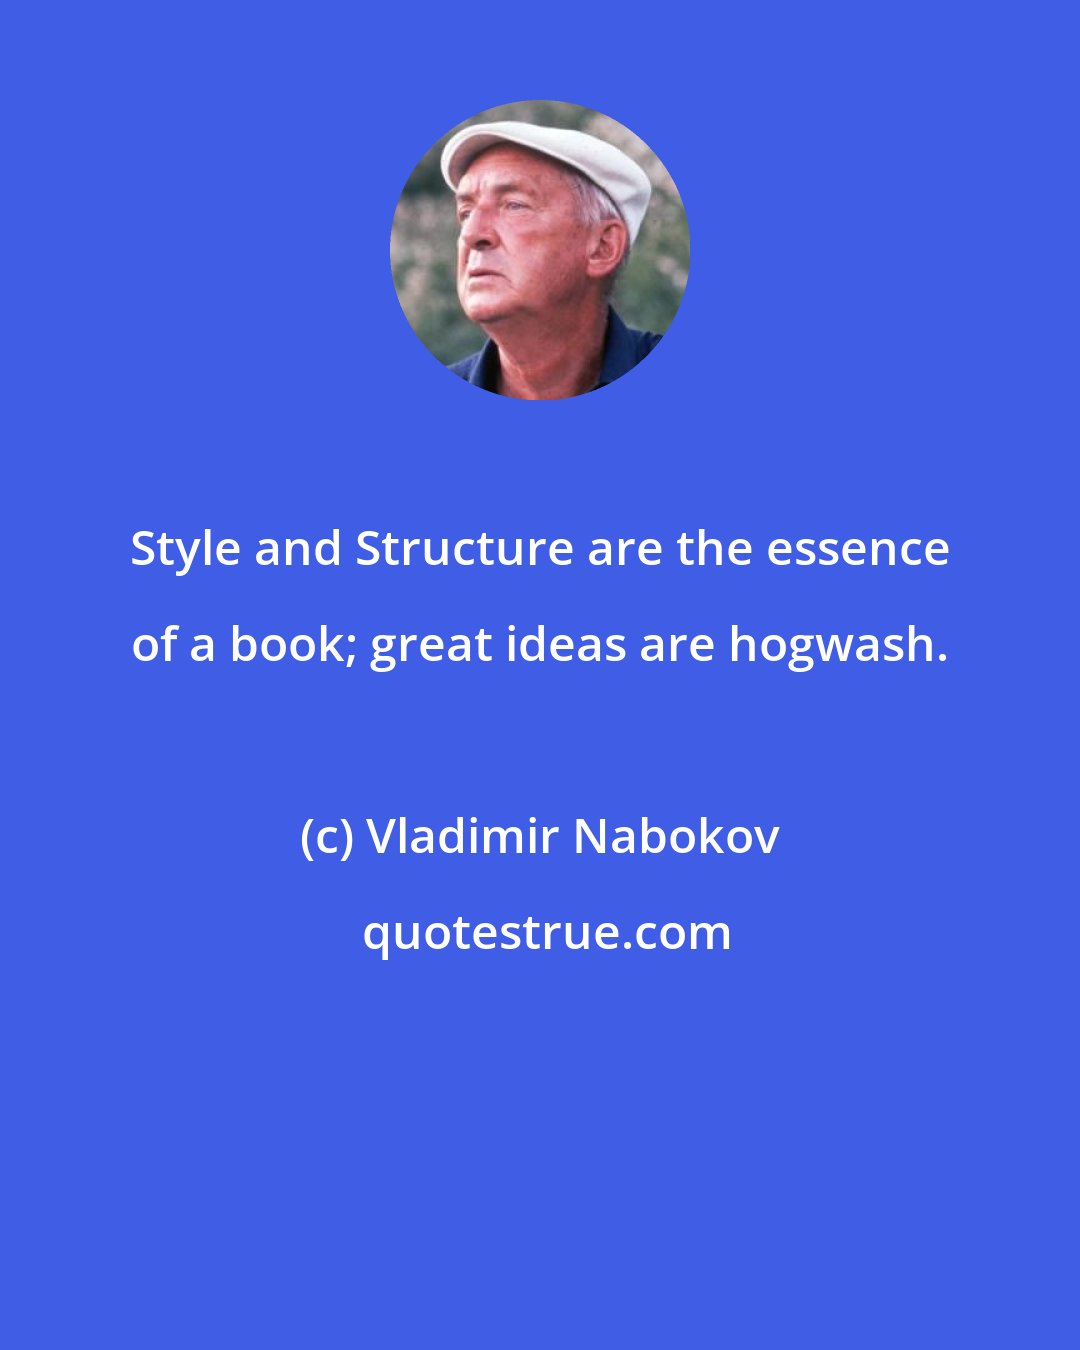 Vladimir Nabokov: Style and Structure are the essence of a book; great ideas are hogwash.